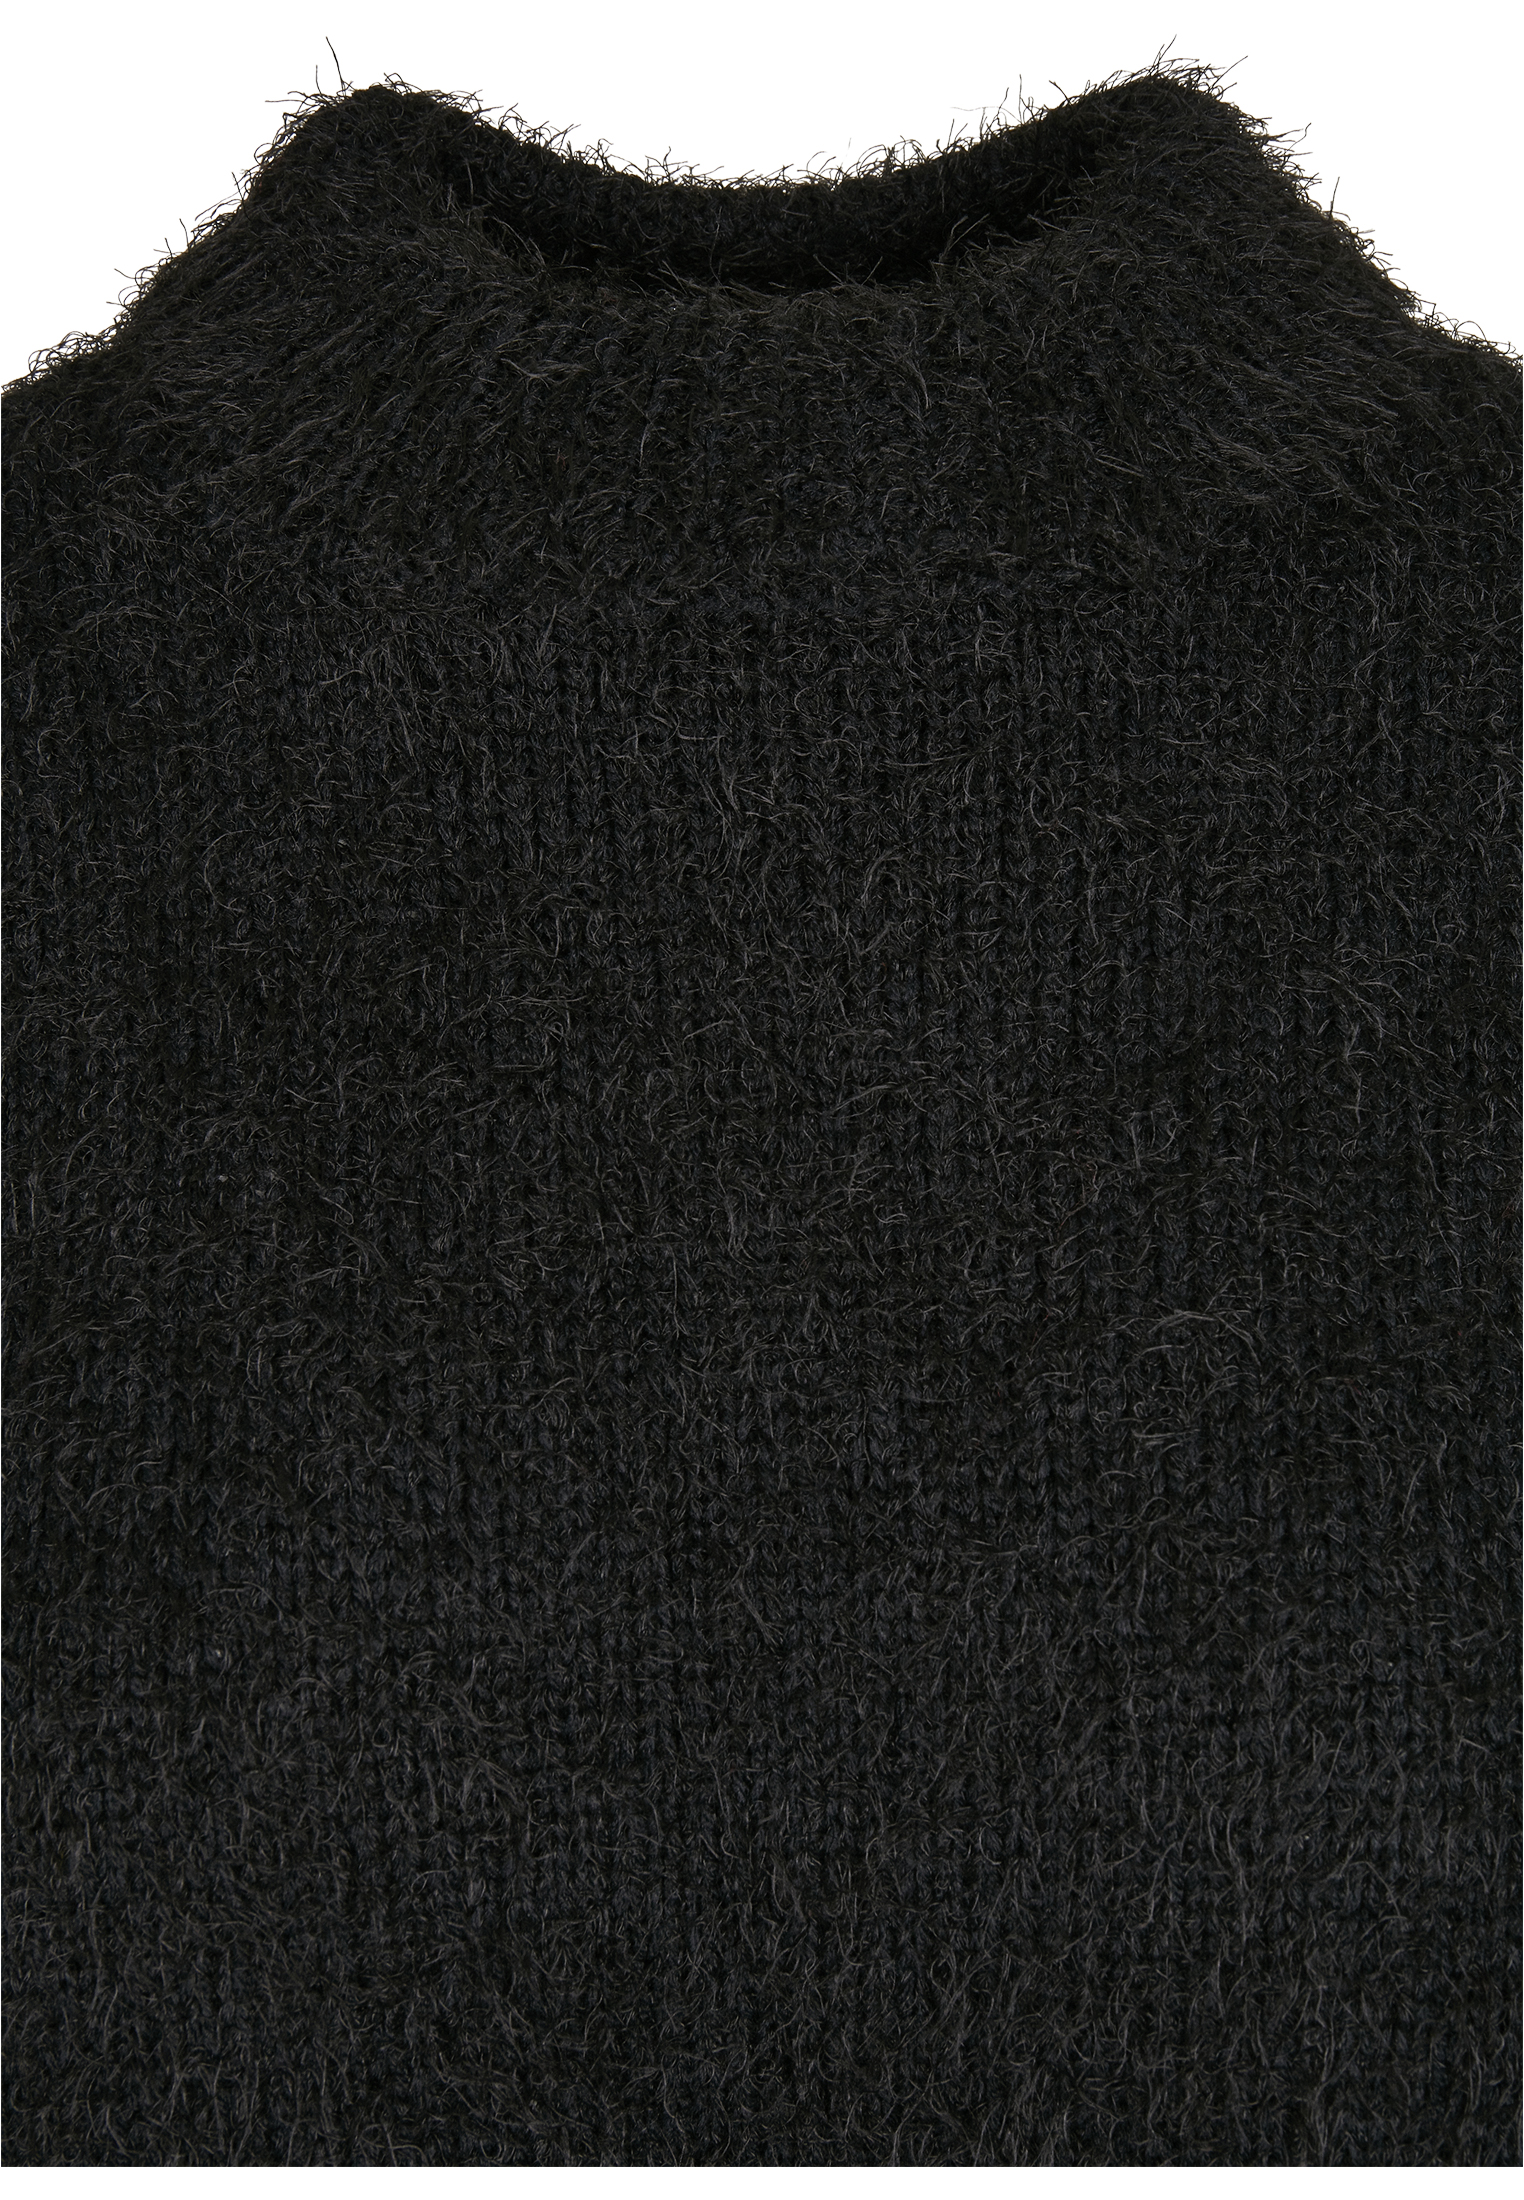 Curvy Ladies Oversized Turtleneck Feather Sweater in Farbe black